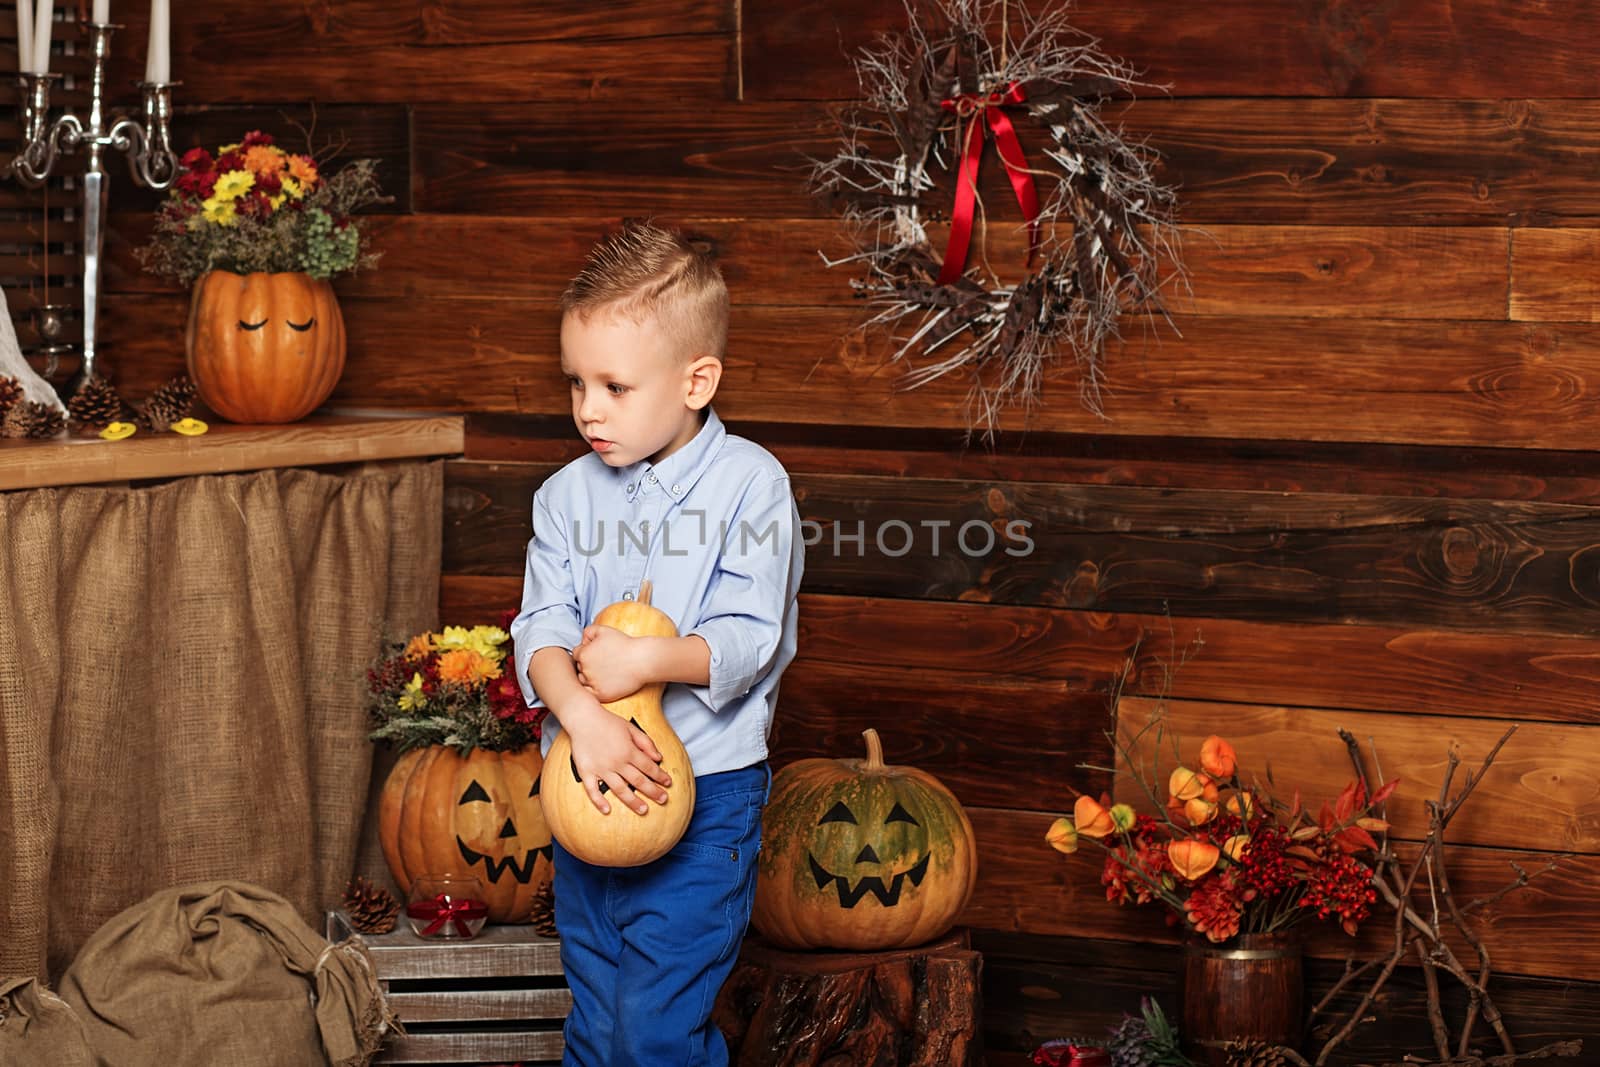 Cute Little Boy having fun in Halloween decorations. Halloween party with child holding painted pumpkin